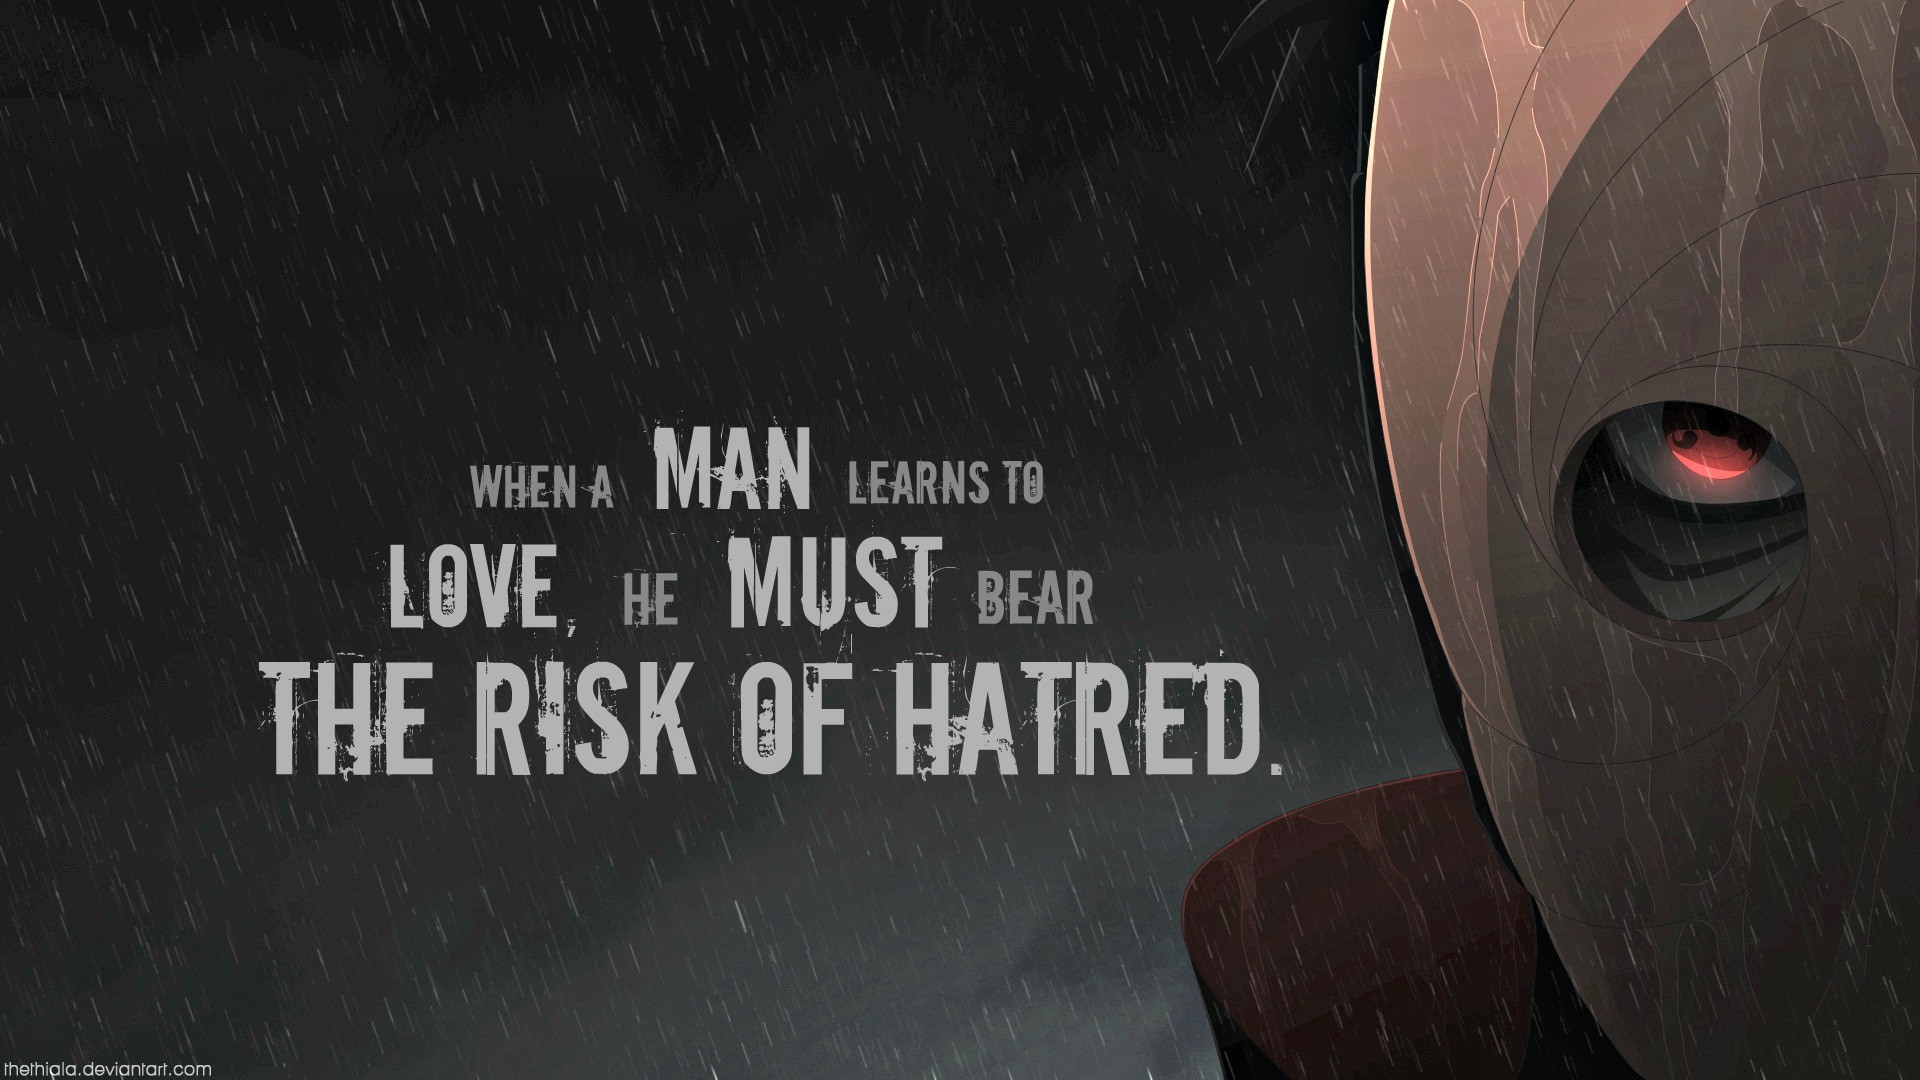 Naruto Quotes Wallpapers (61+ images)